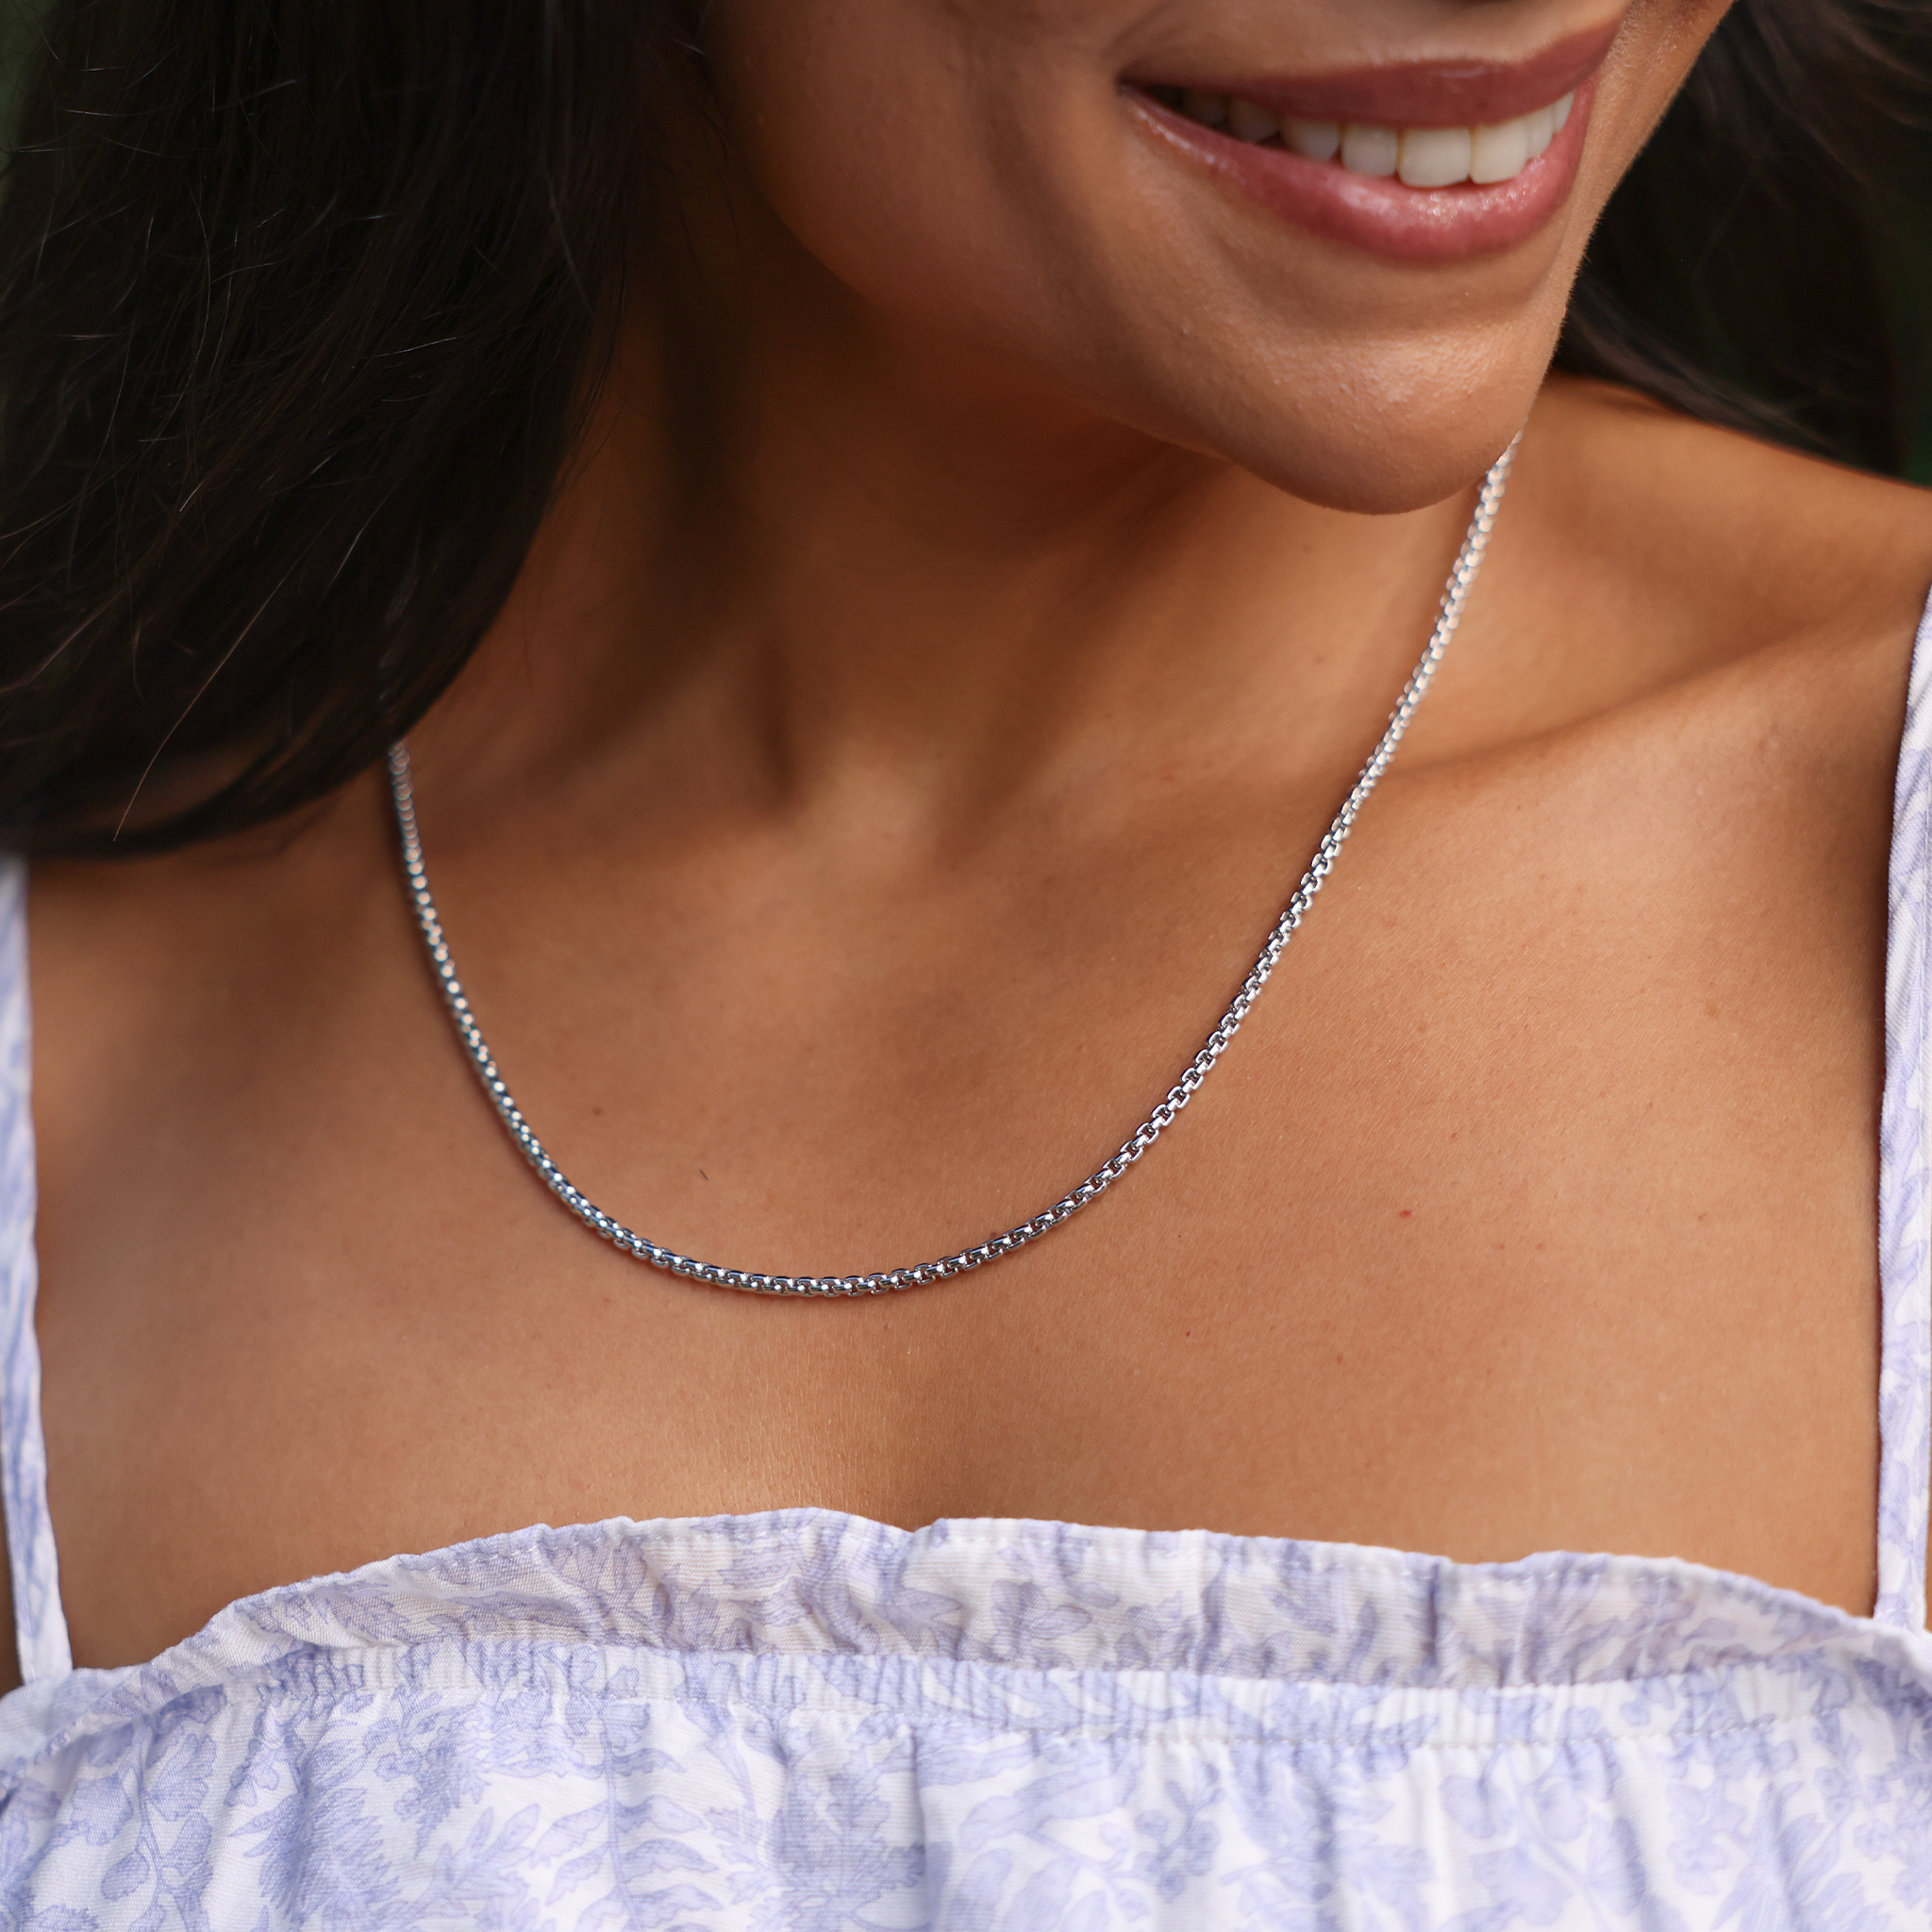 2.5mm Round Box Chain in Sterling Silver